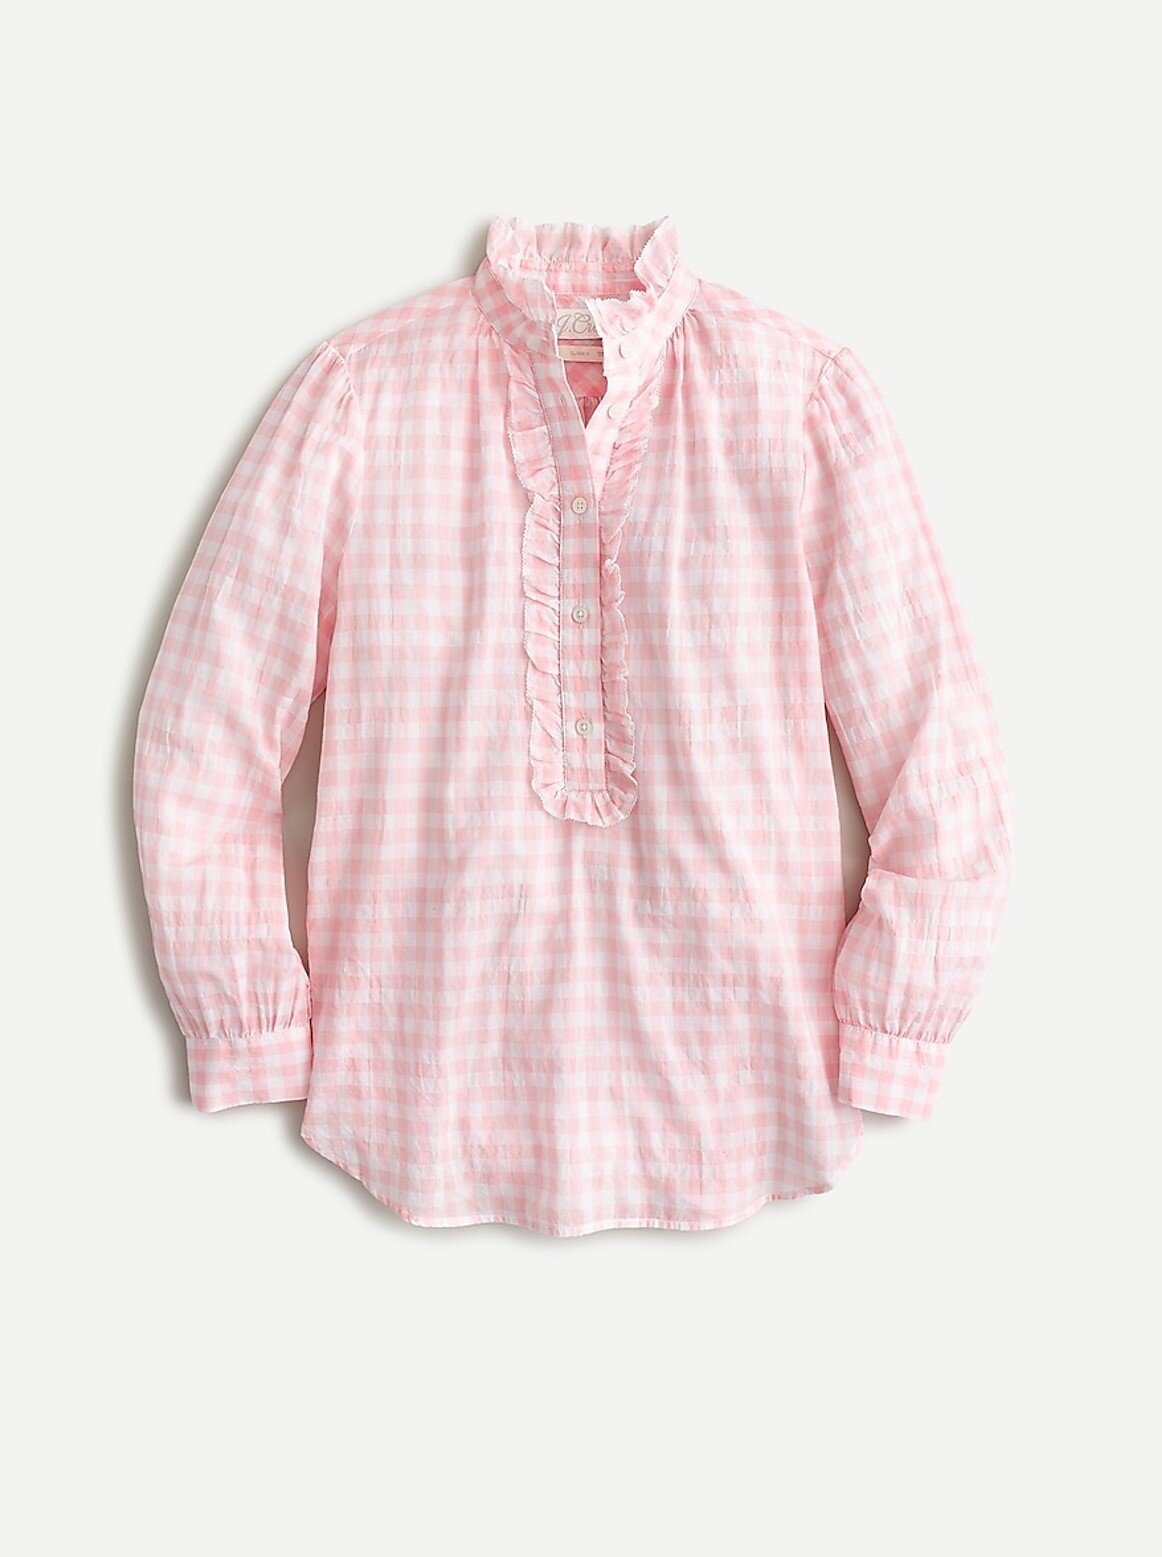 Pink Gingham Top, Now $60